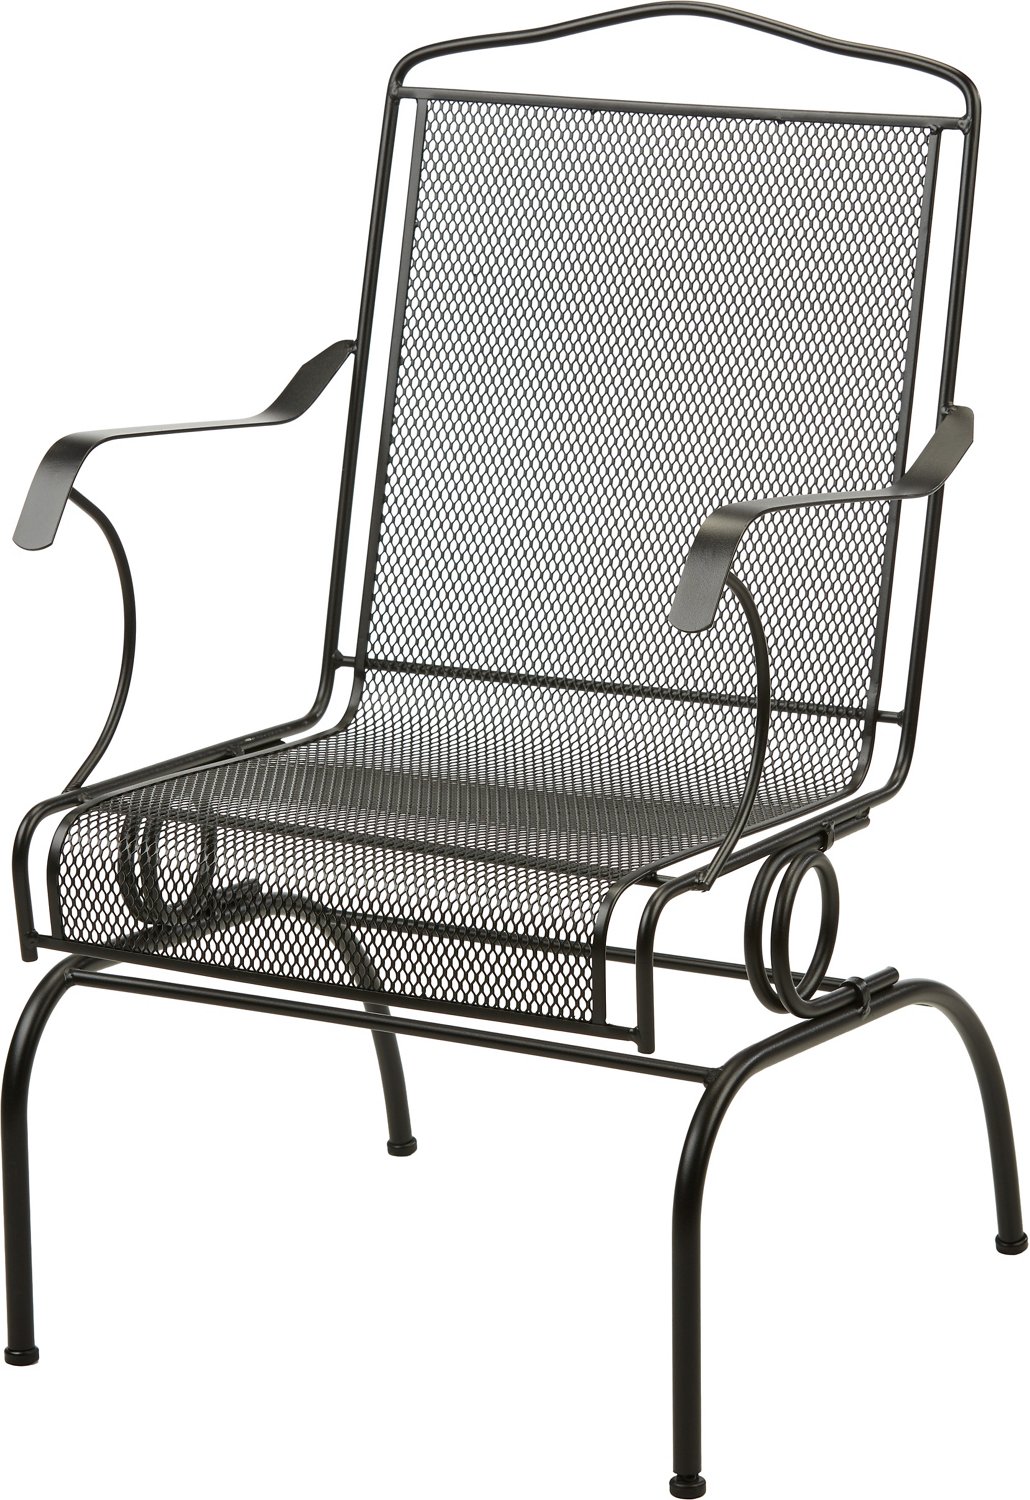 academy sports outdoor rocking chair